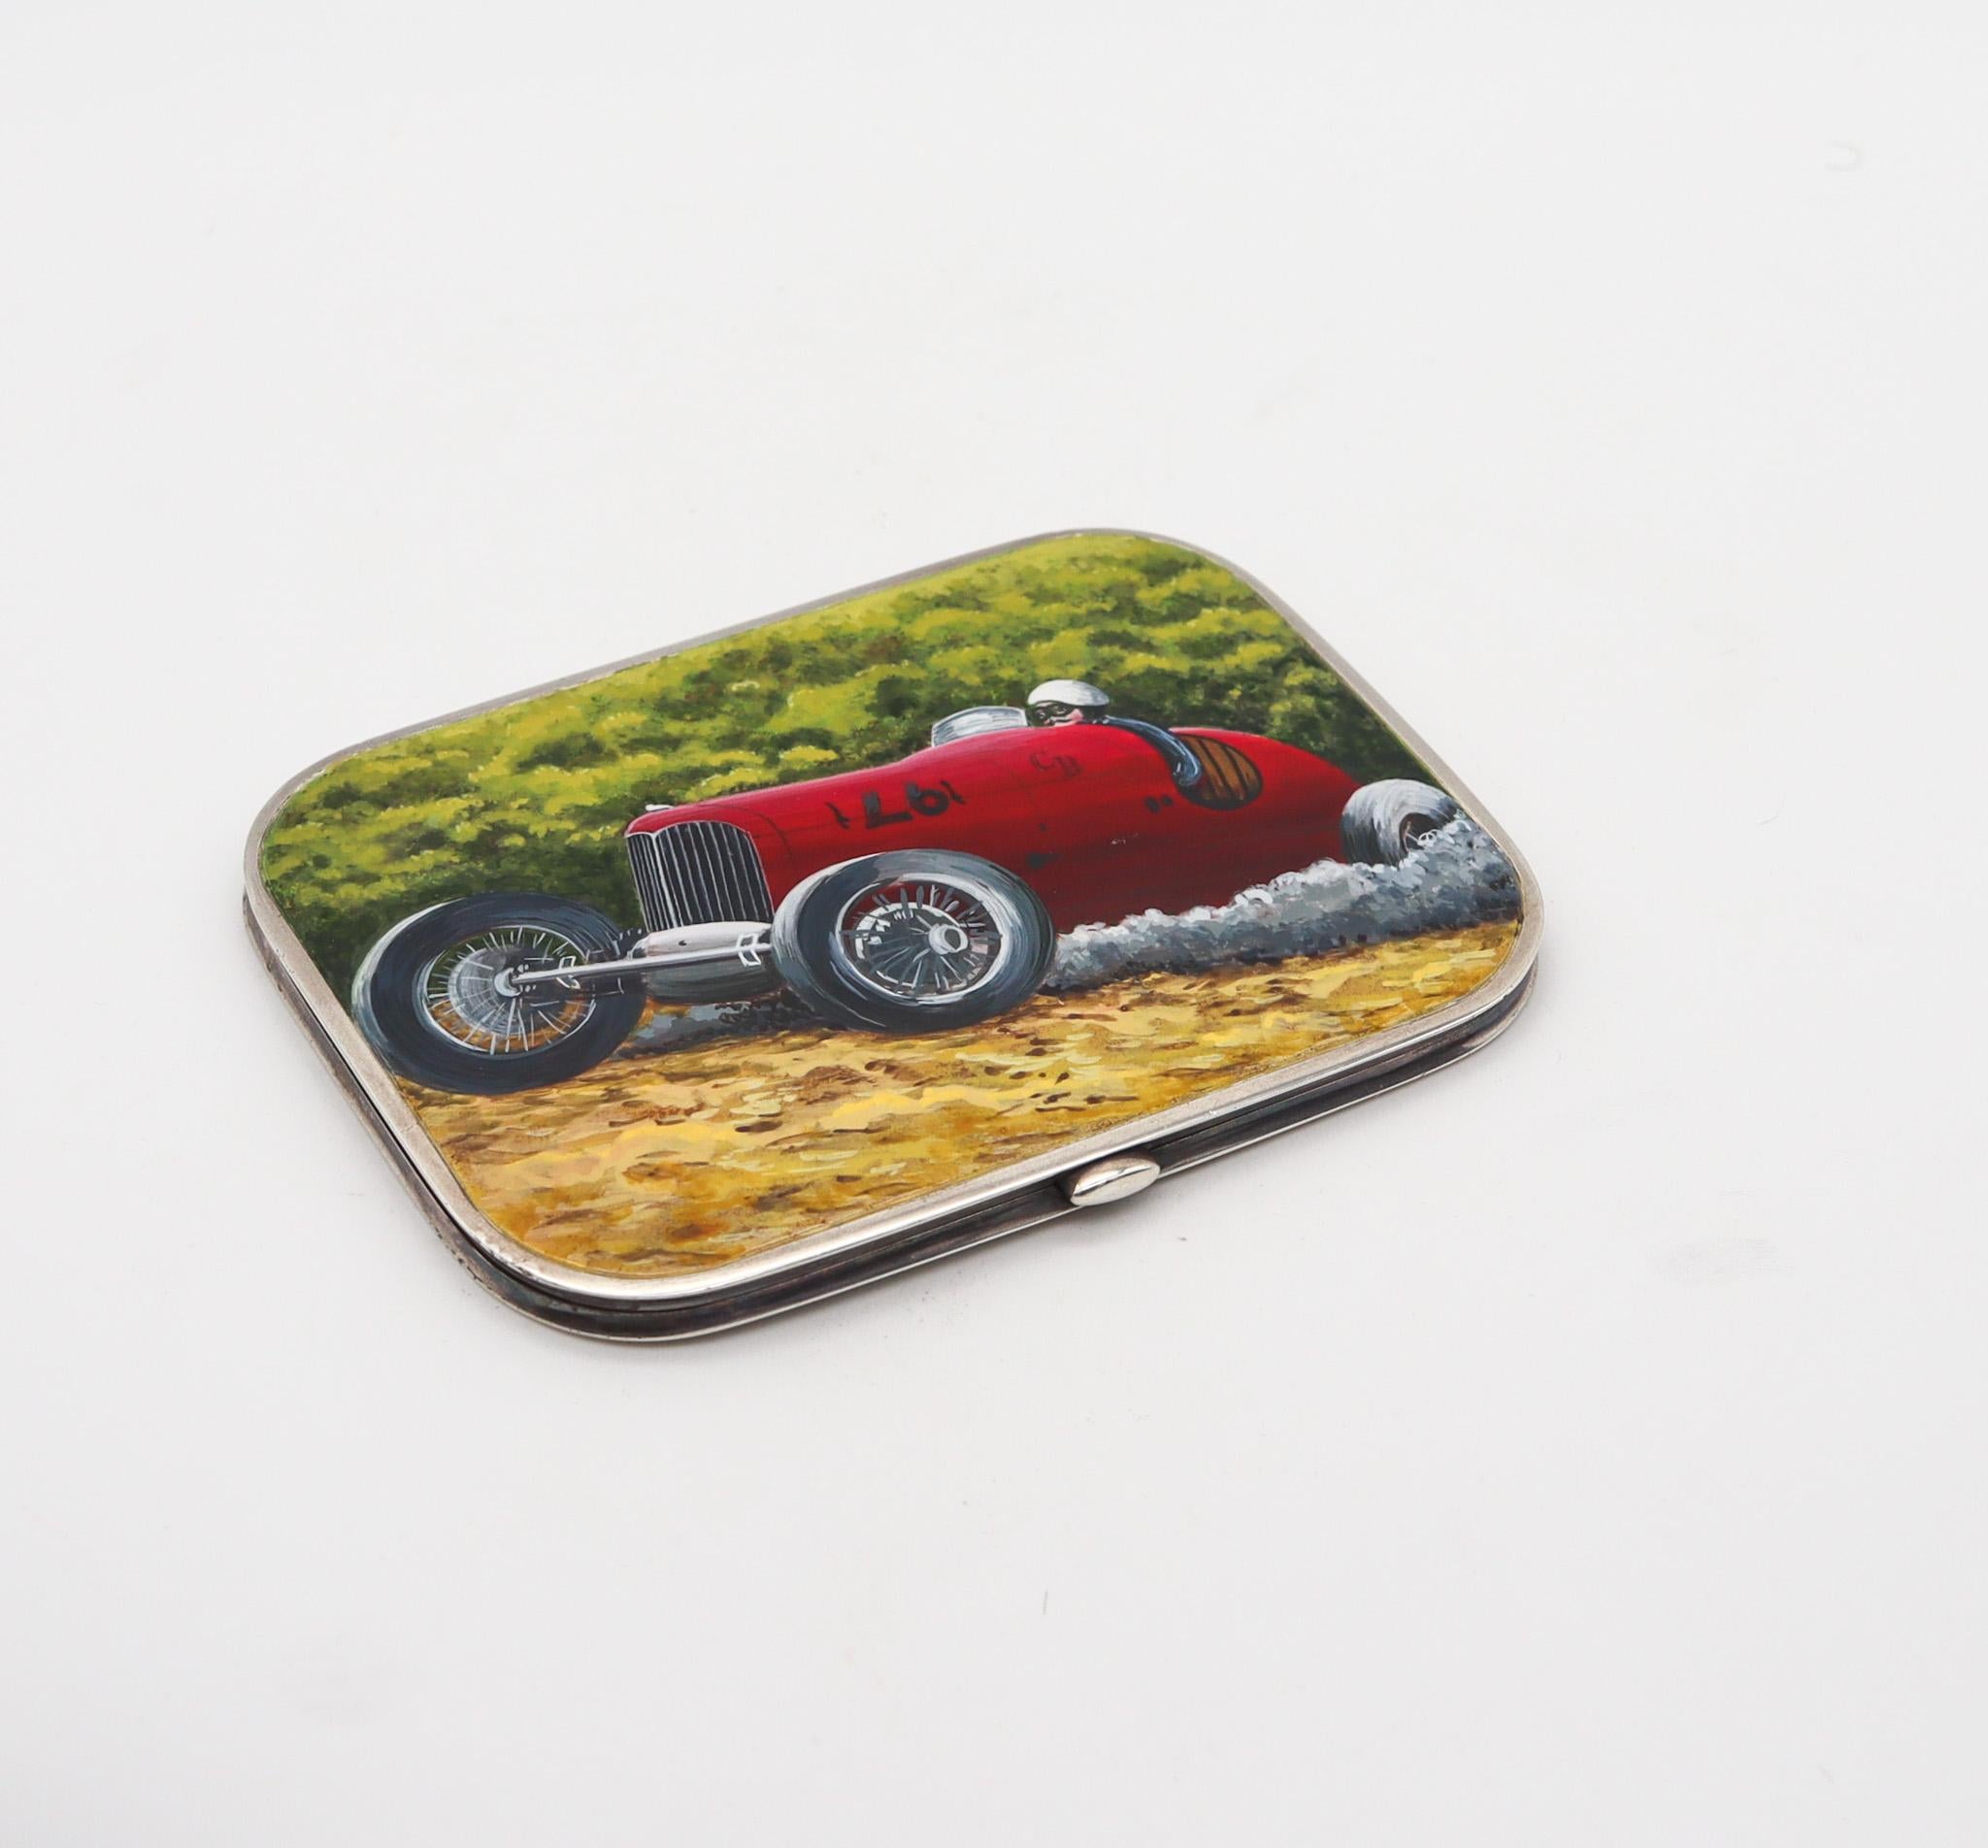 English Finnigans 1932 London Art Deco Enamel Case Box With Racing Car In .925 Sterling  For Sale